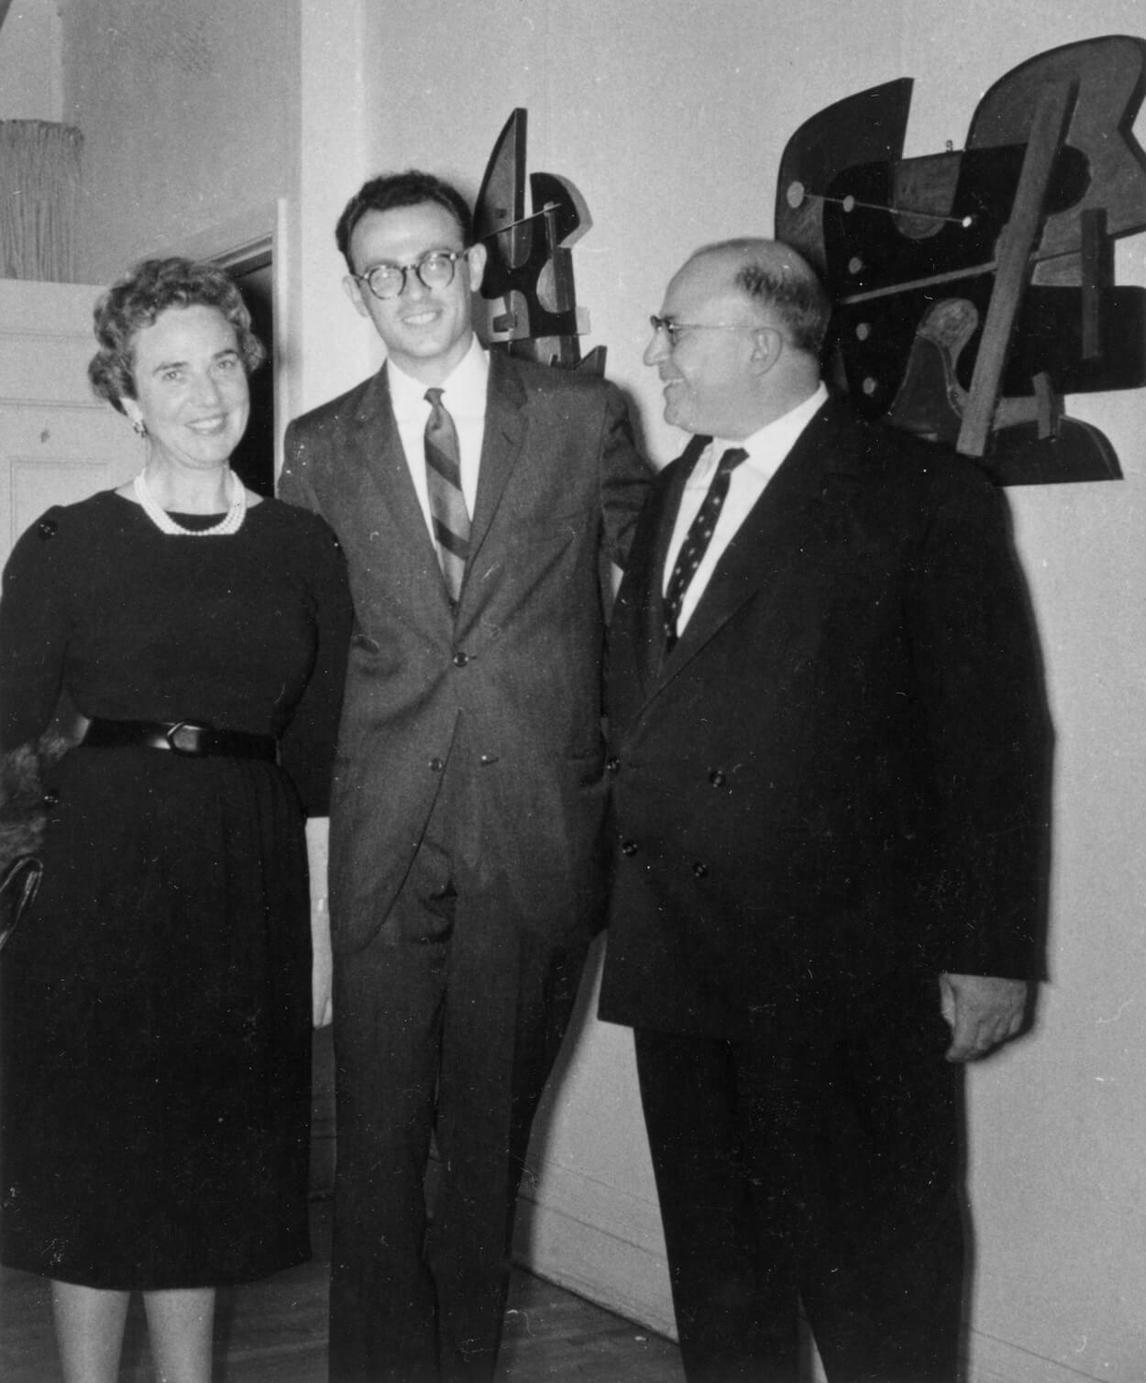 Sorel Etrog with Ayala and Samuel J. Zacks at Etrog’s first Canadian one-man show at Gallery Moos, Toronto, 1959